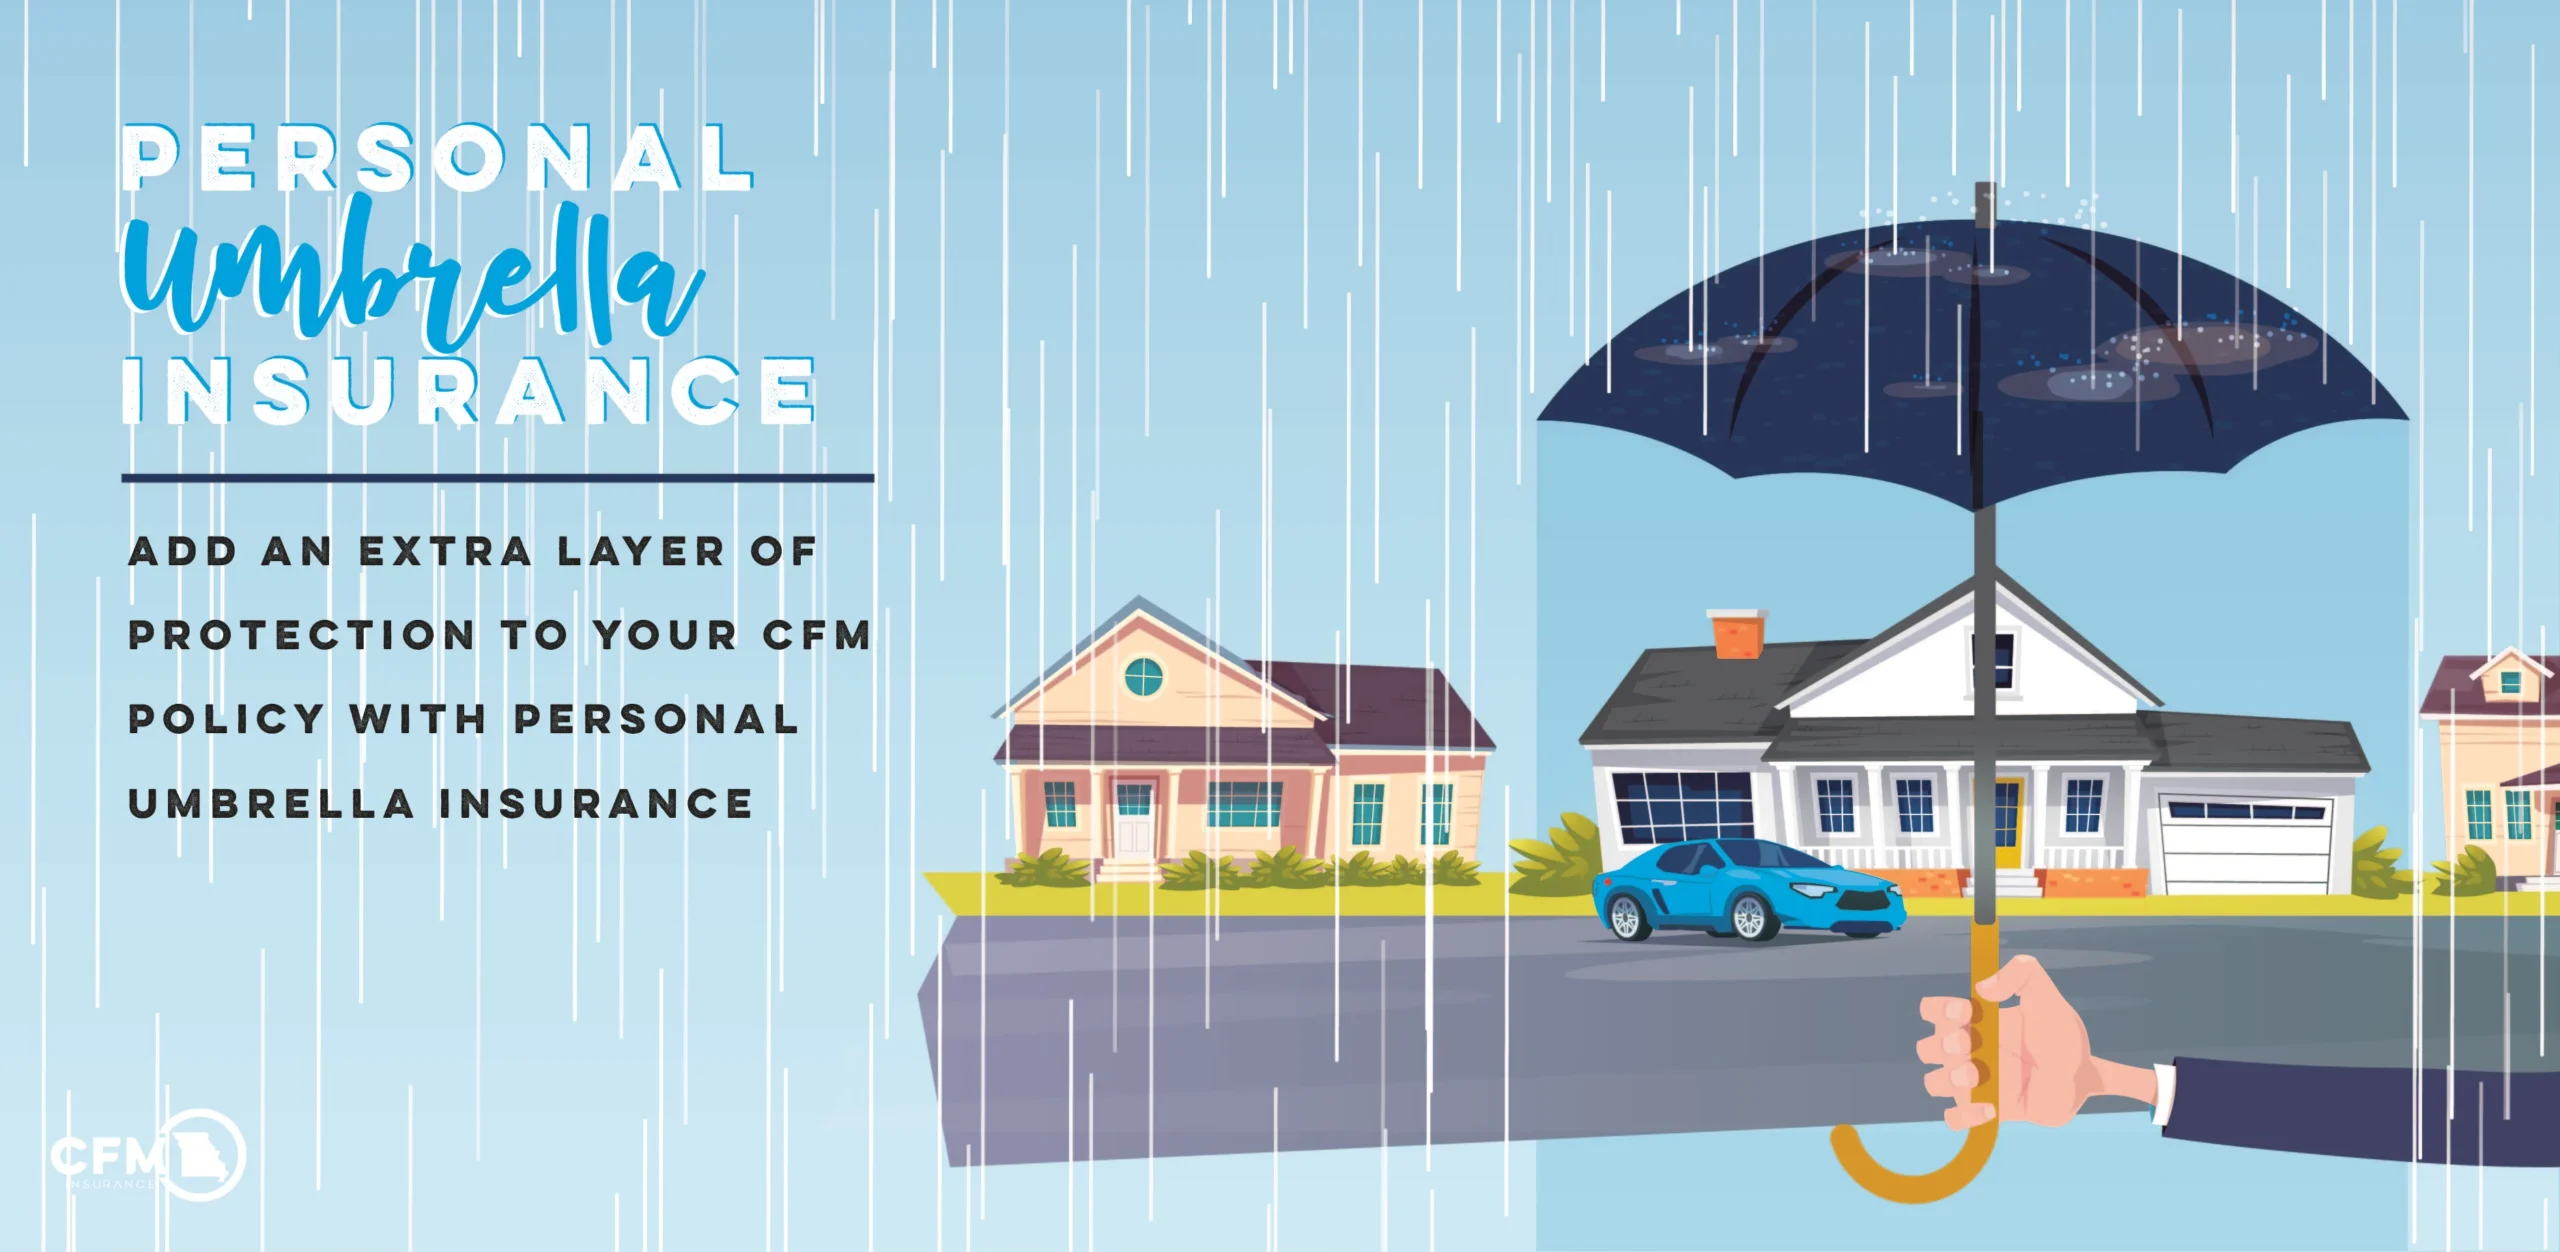 Umbrella Insurance: An Extra Layer of Coverage